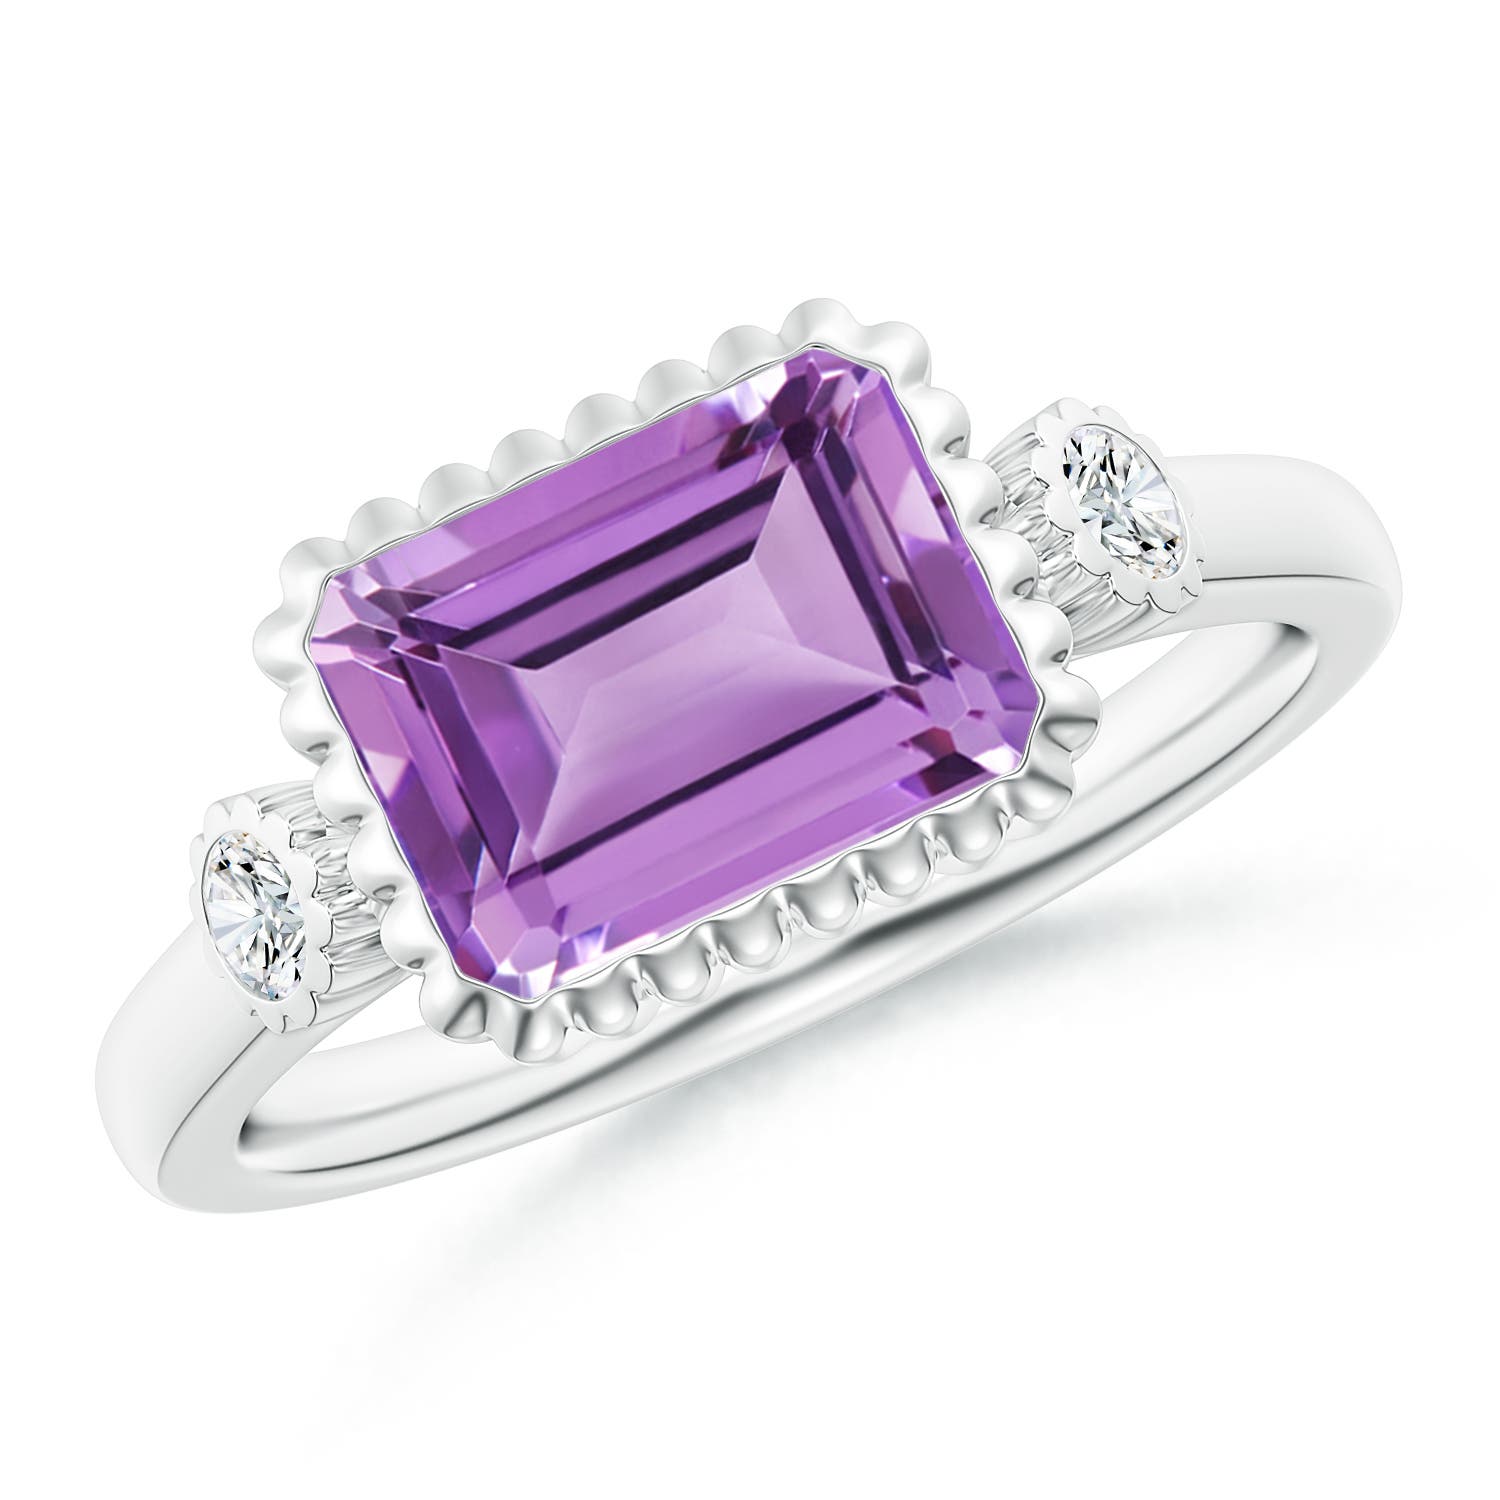 A - Amethyst / 2.34 CT / 14 KT White Gold